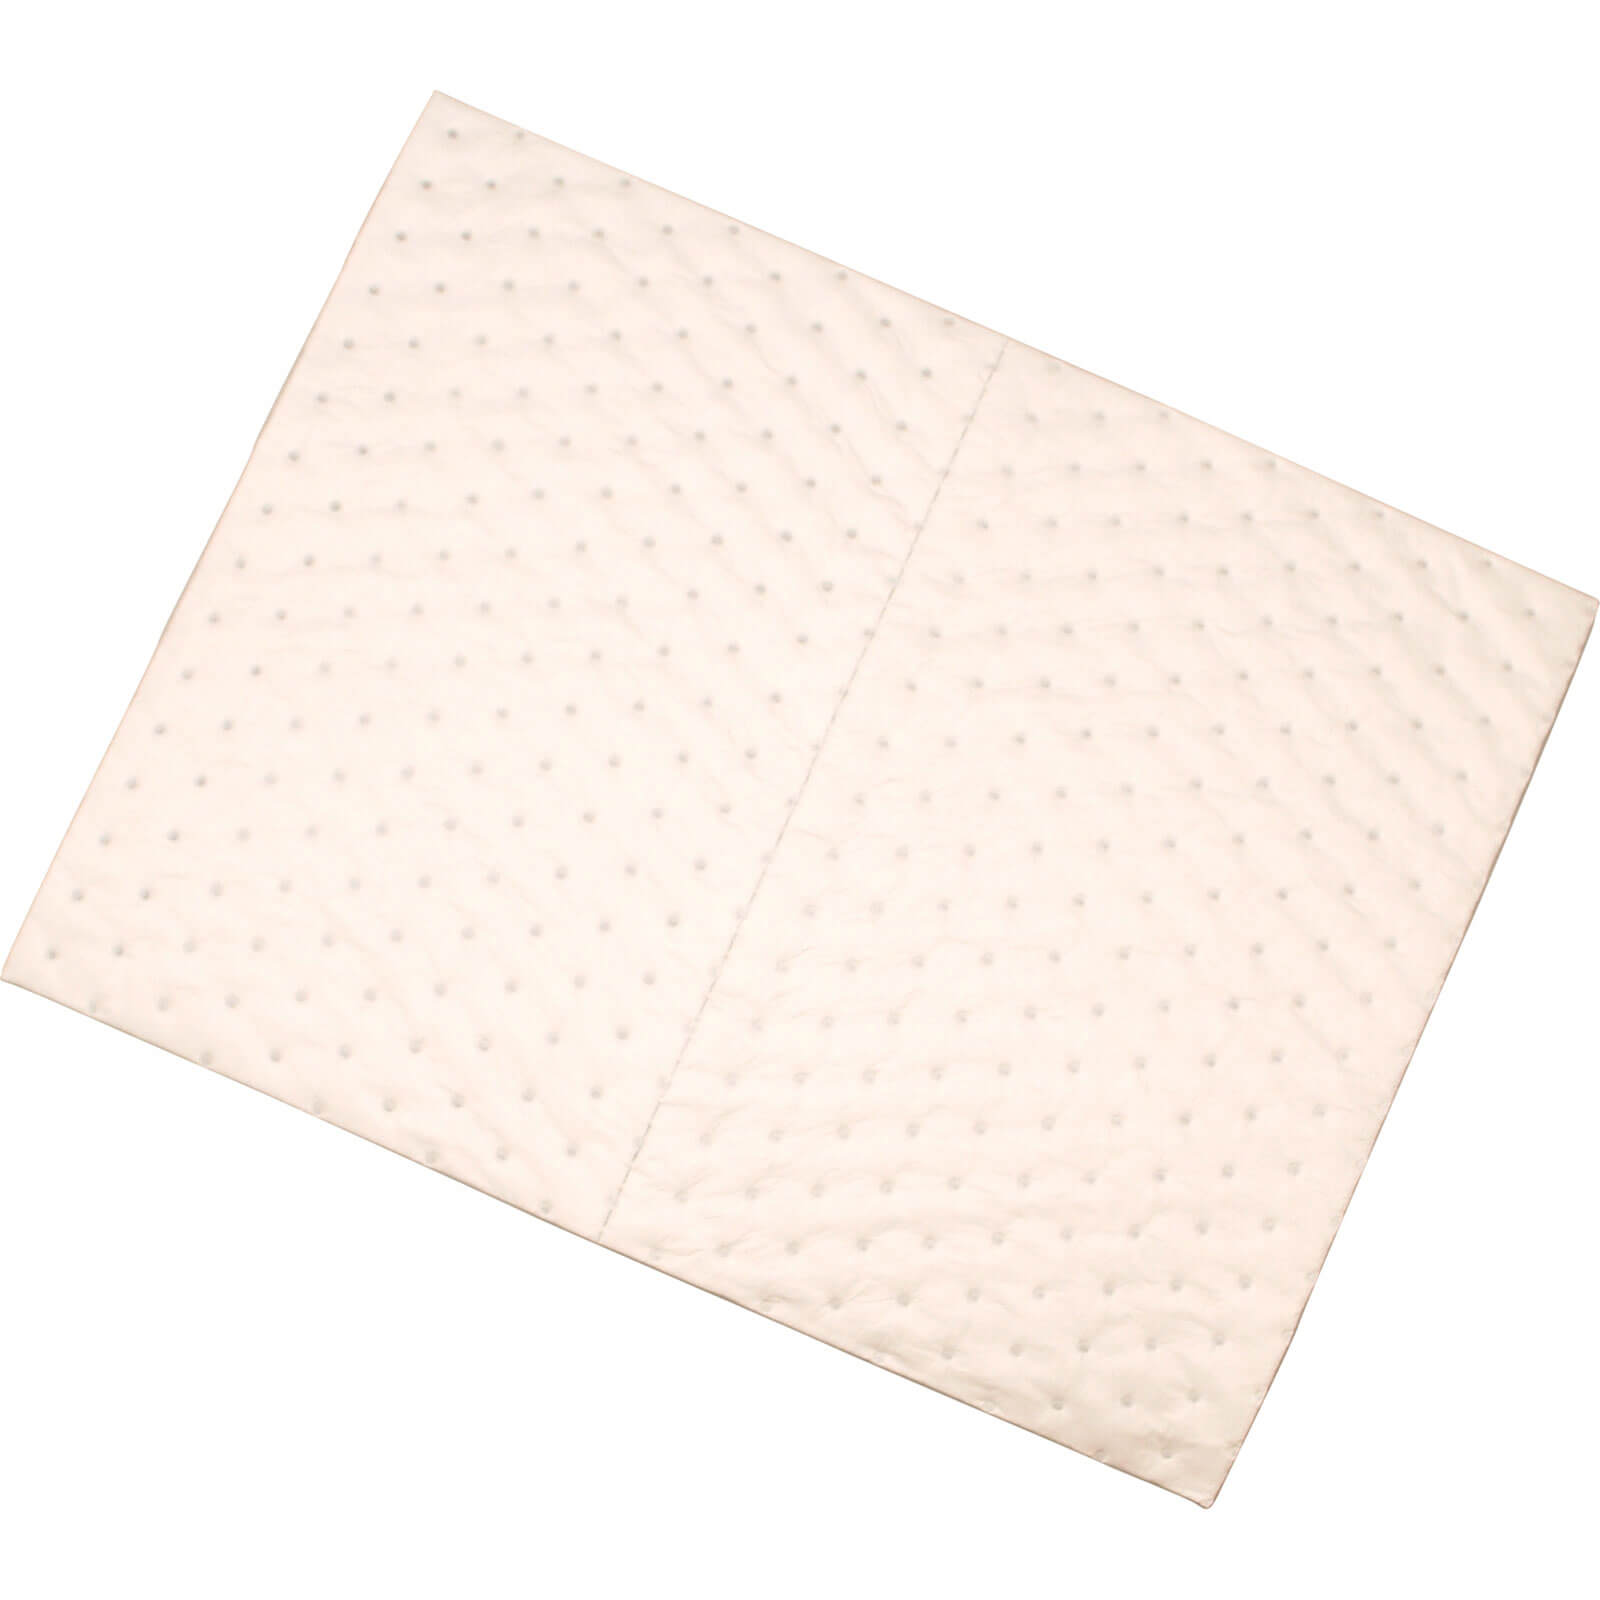 Scan Oil & Fuel Absorbent Pads Pack of 10